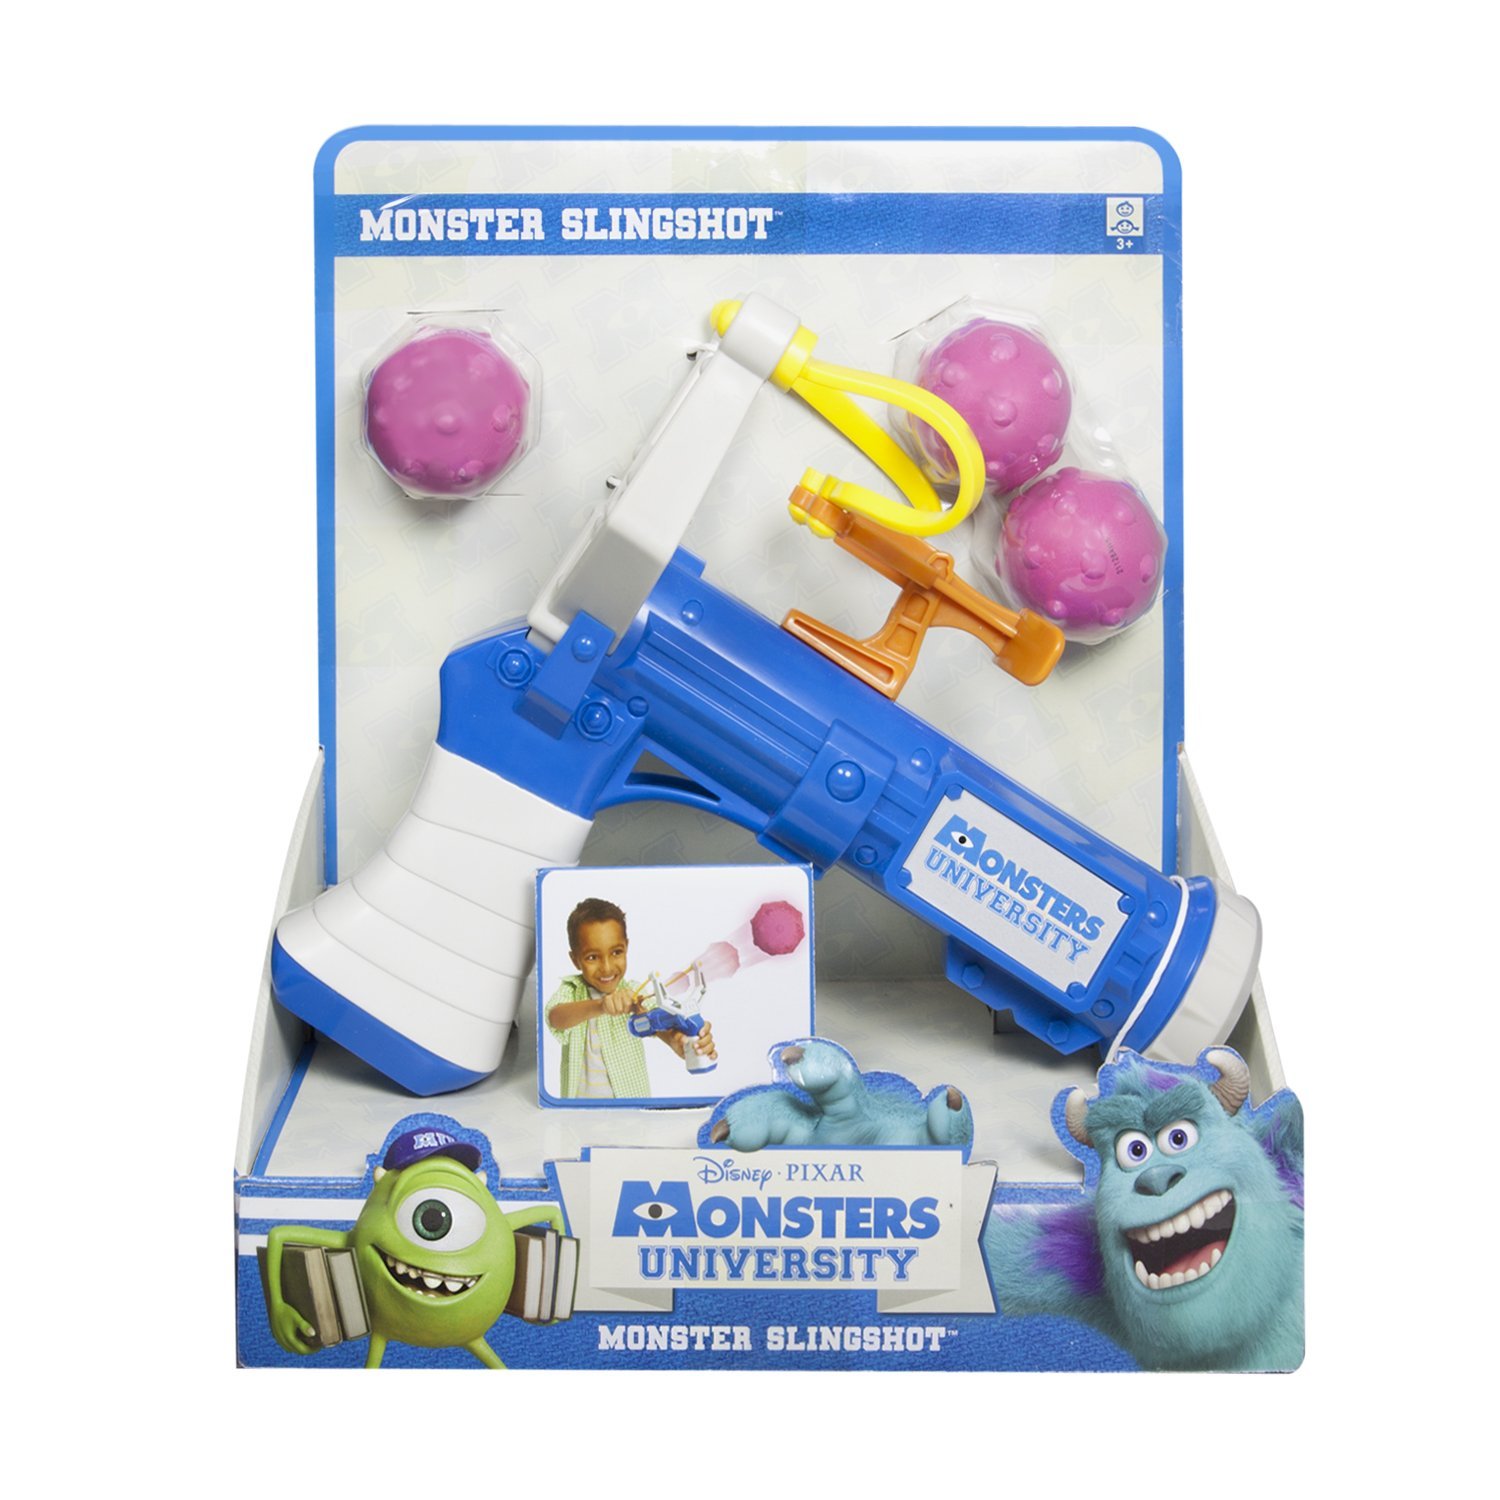 collecting-the-mouse-monster-s-university-merchandise-and-toys-roll-a-scare-ridez